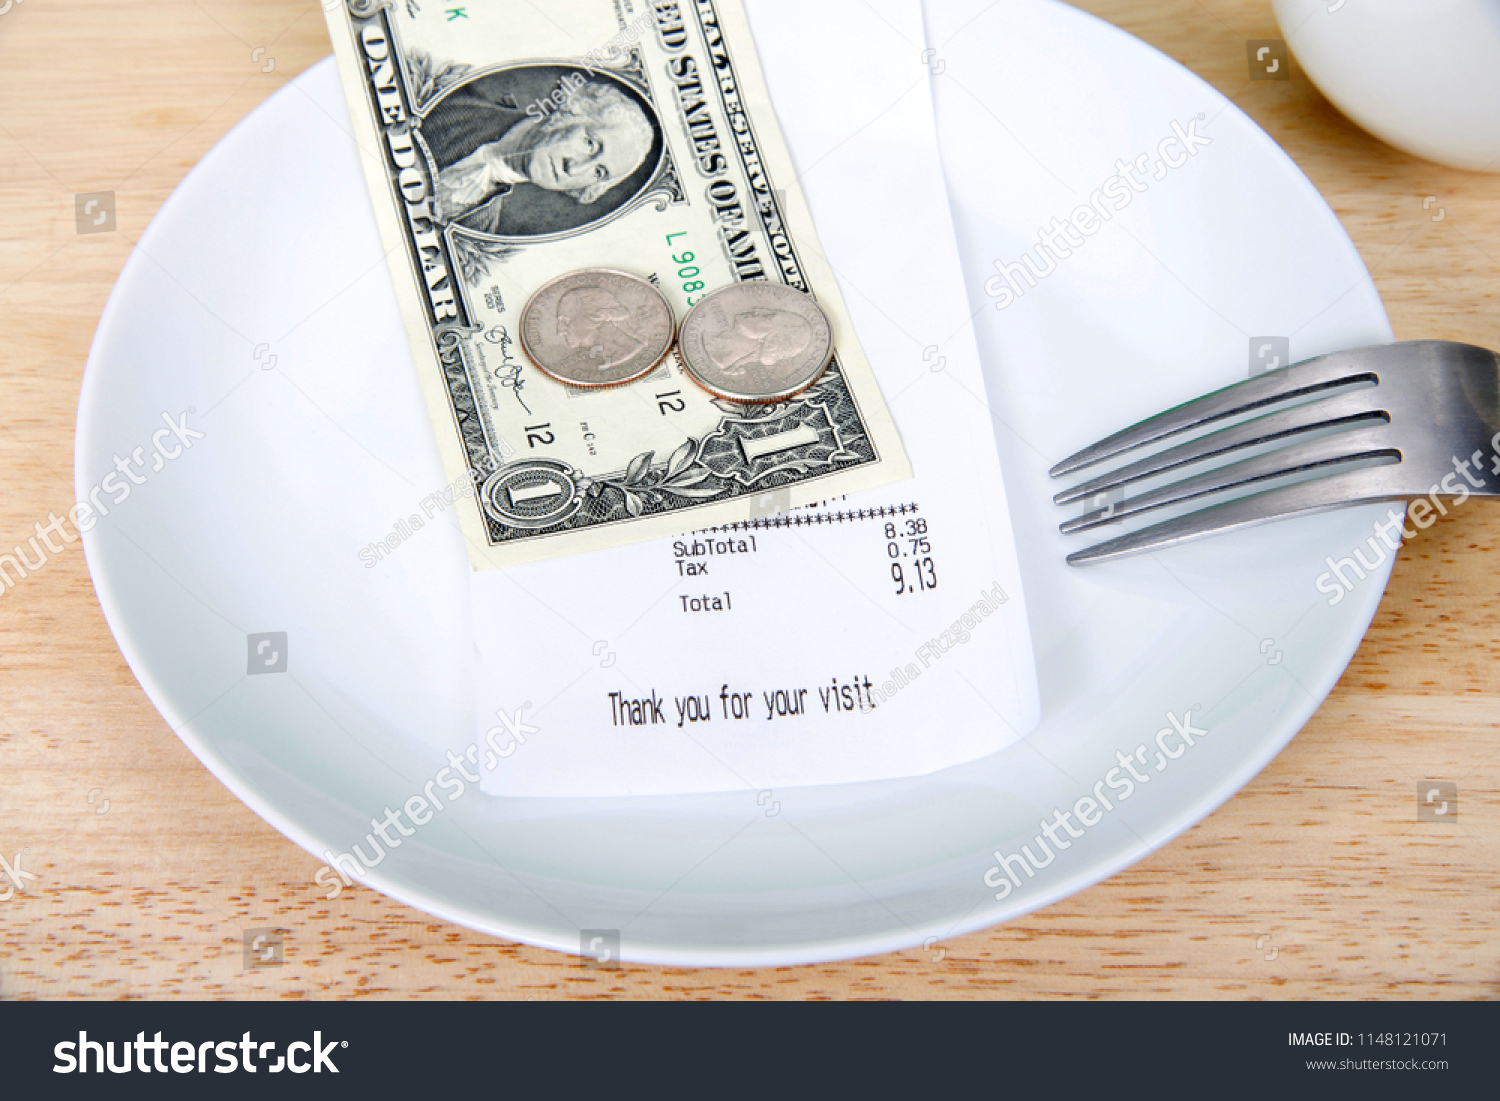 Plate Fork Upside Down Indicating Finished Stock Photo (Edit Now ...